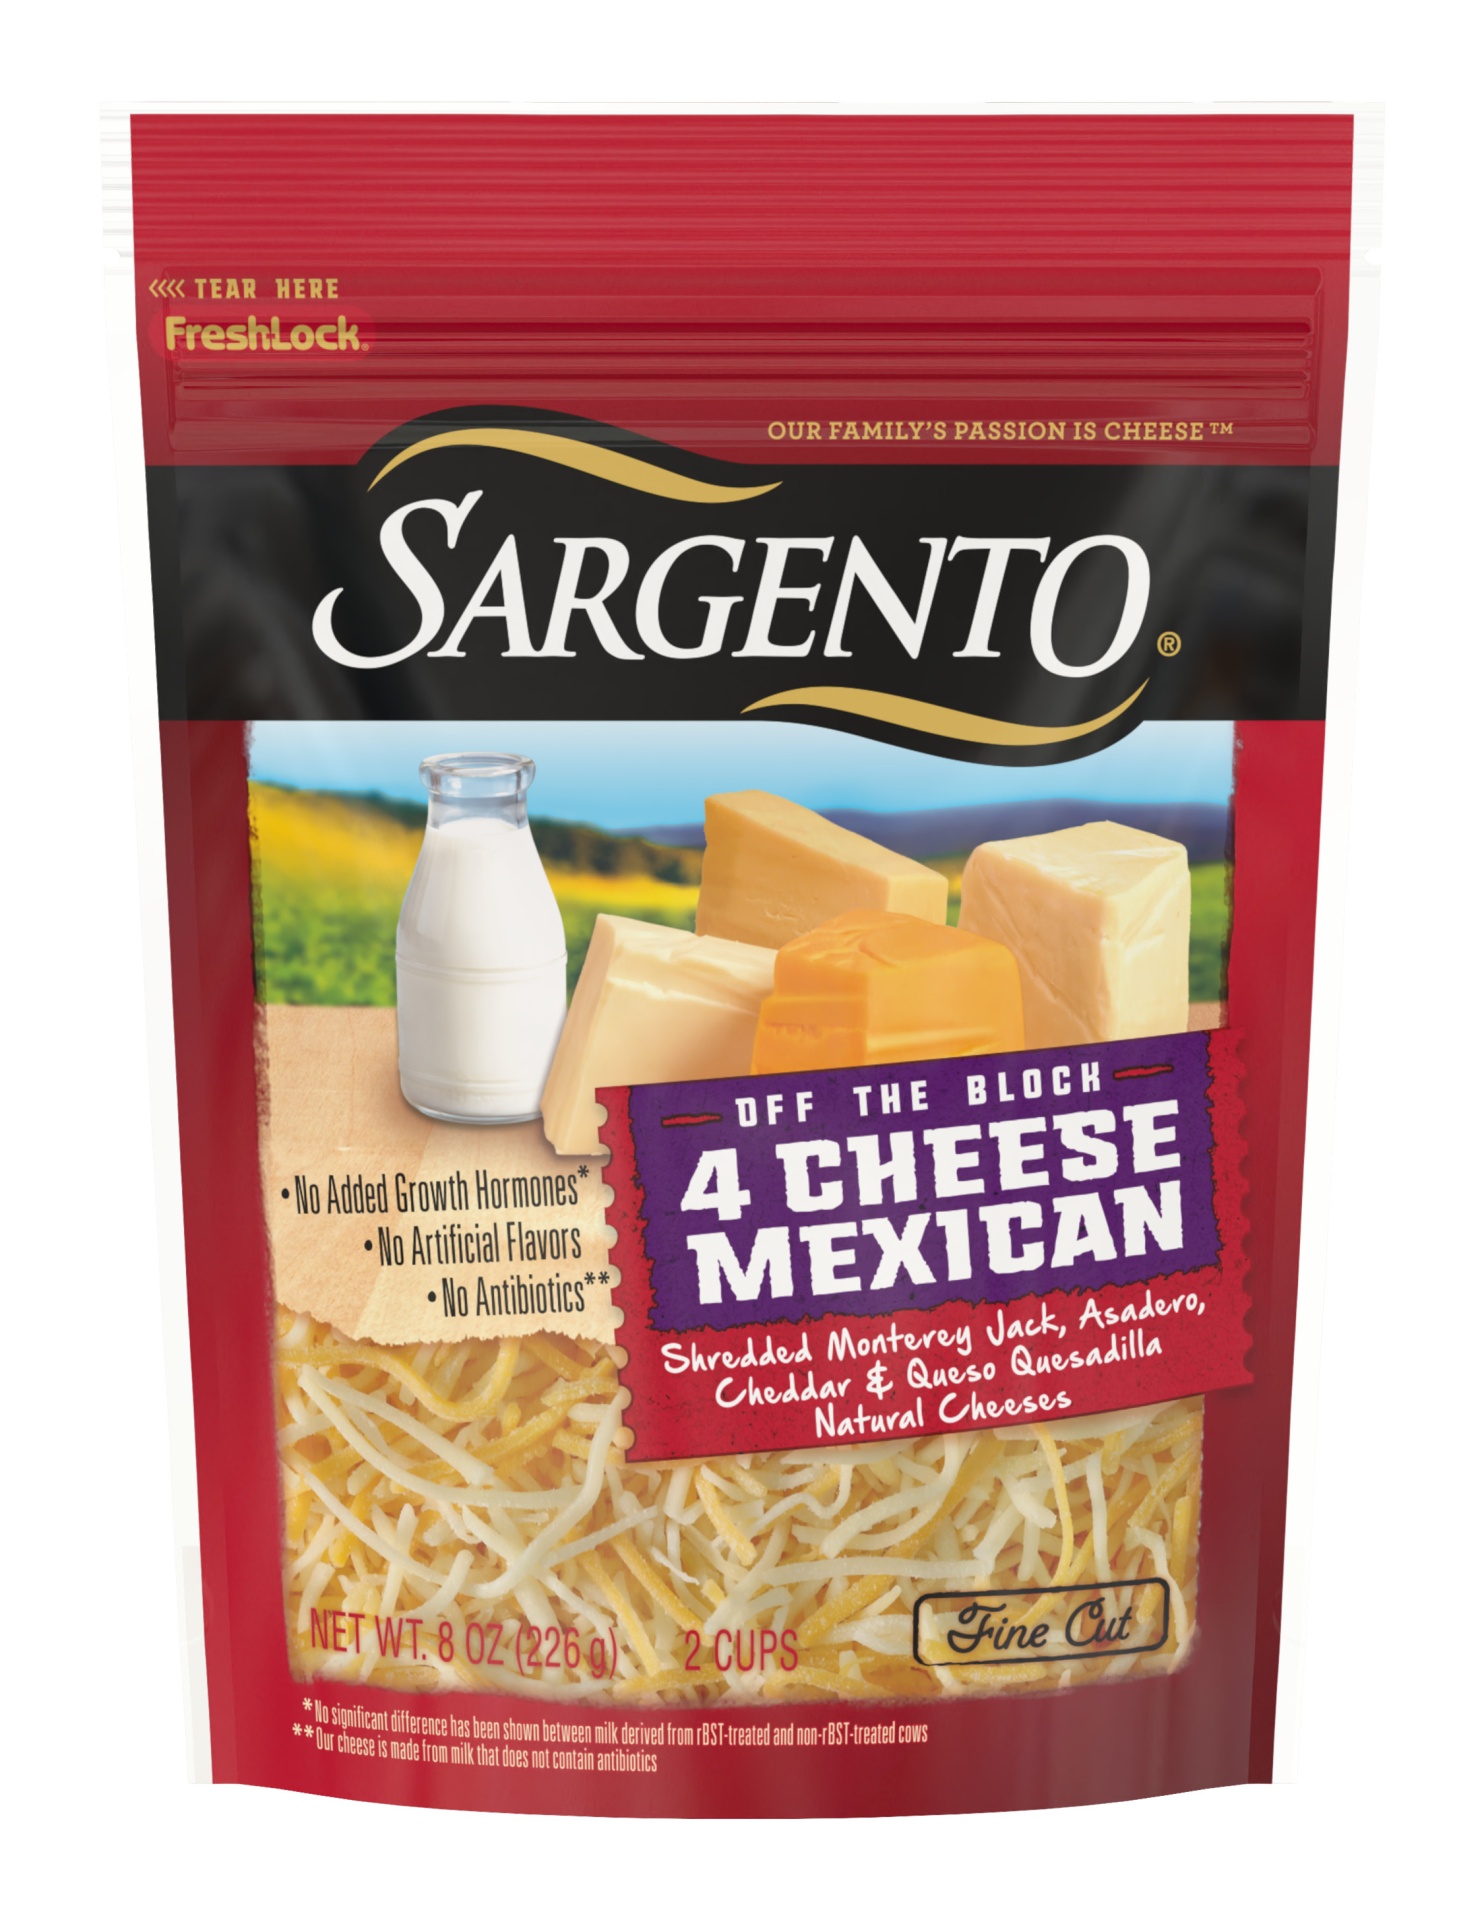 slide 1 of 7, Sargento Off The Block Four Cheese - Mexican Shredded & Fine Cut, 8 oz